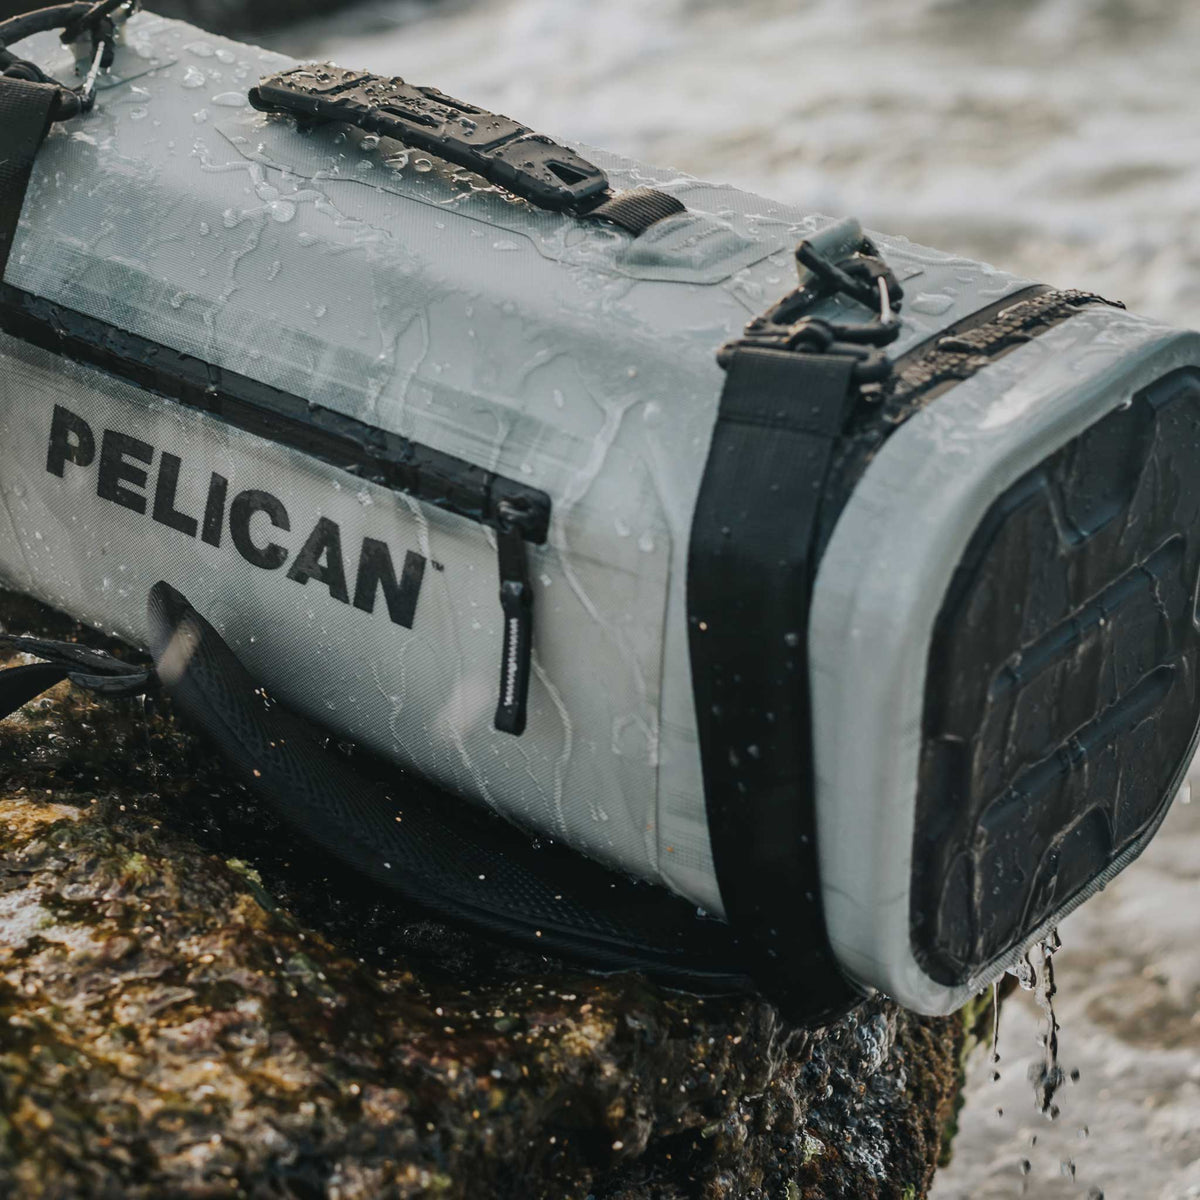 Pelican™ Dayventure Sling Soft Cooler with water dripping off it